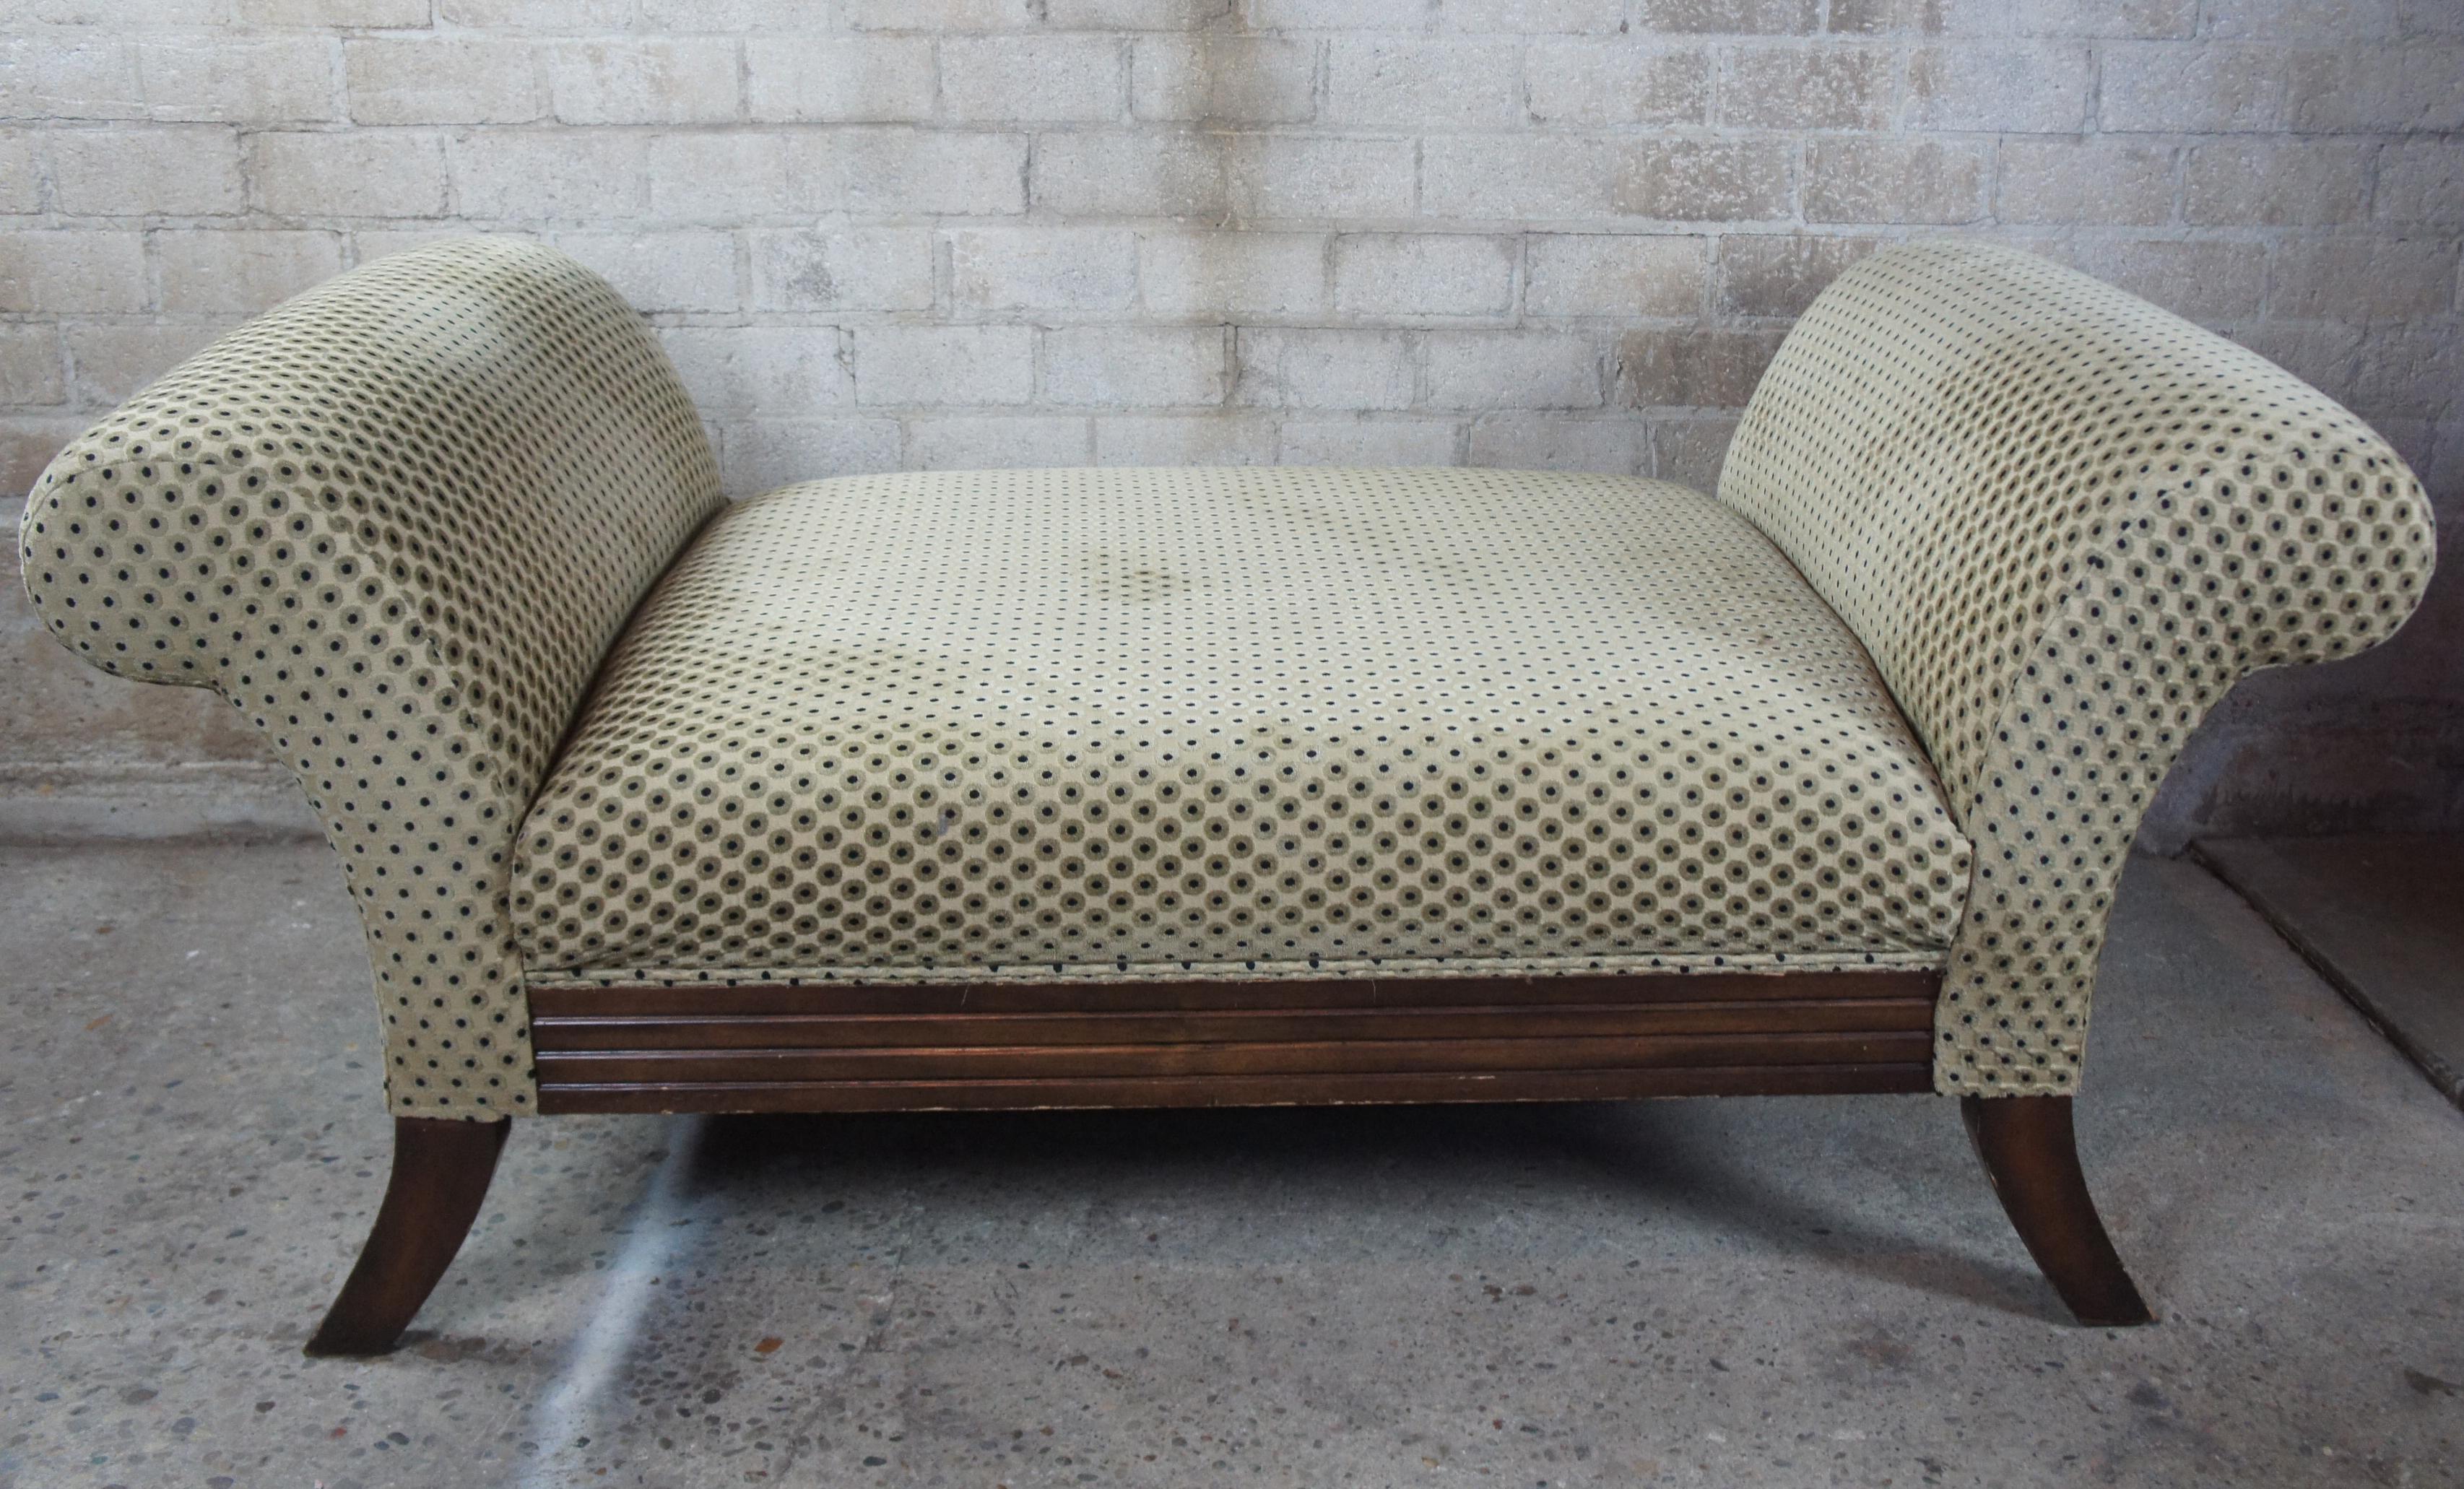 Traditional Contemporary Polka Dot Upholstered Lounge Day Bed Settee In Good Condition For Sale In Dayton, OH